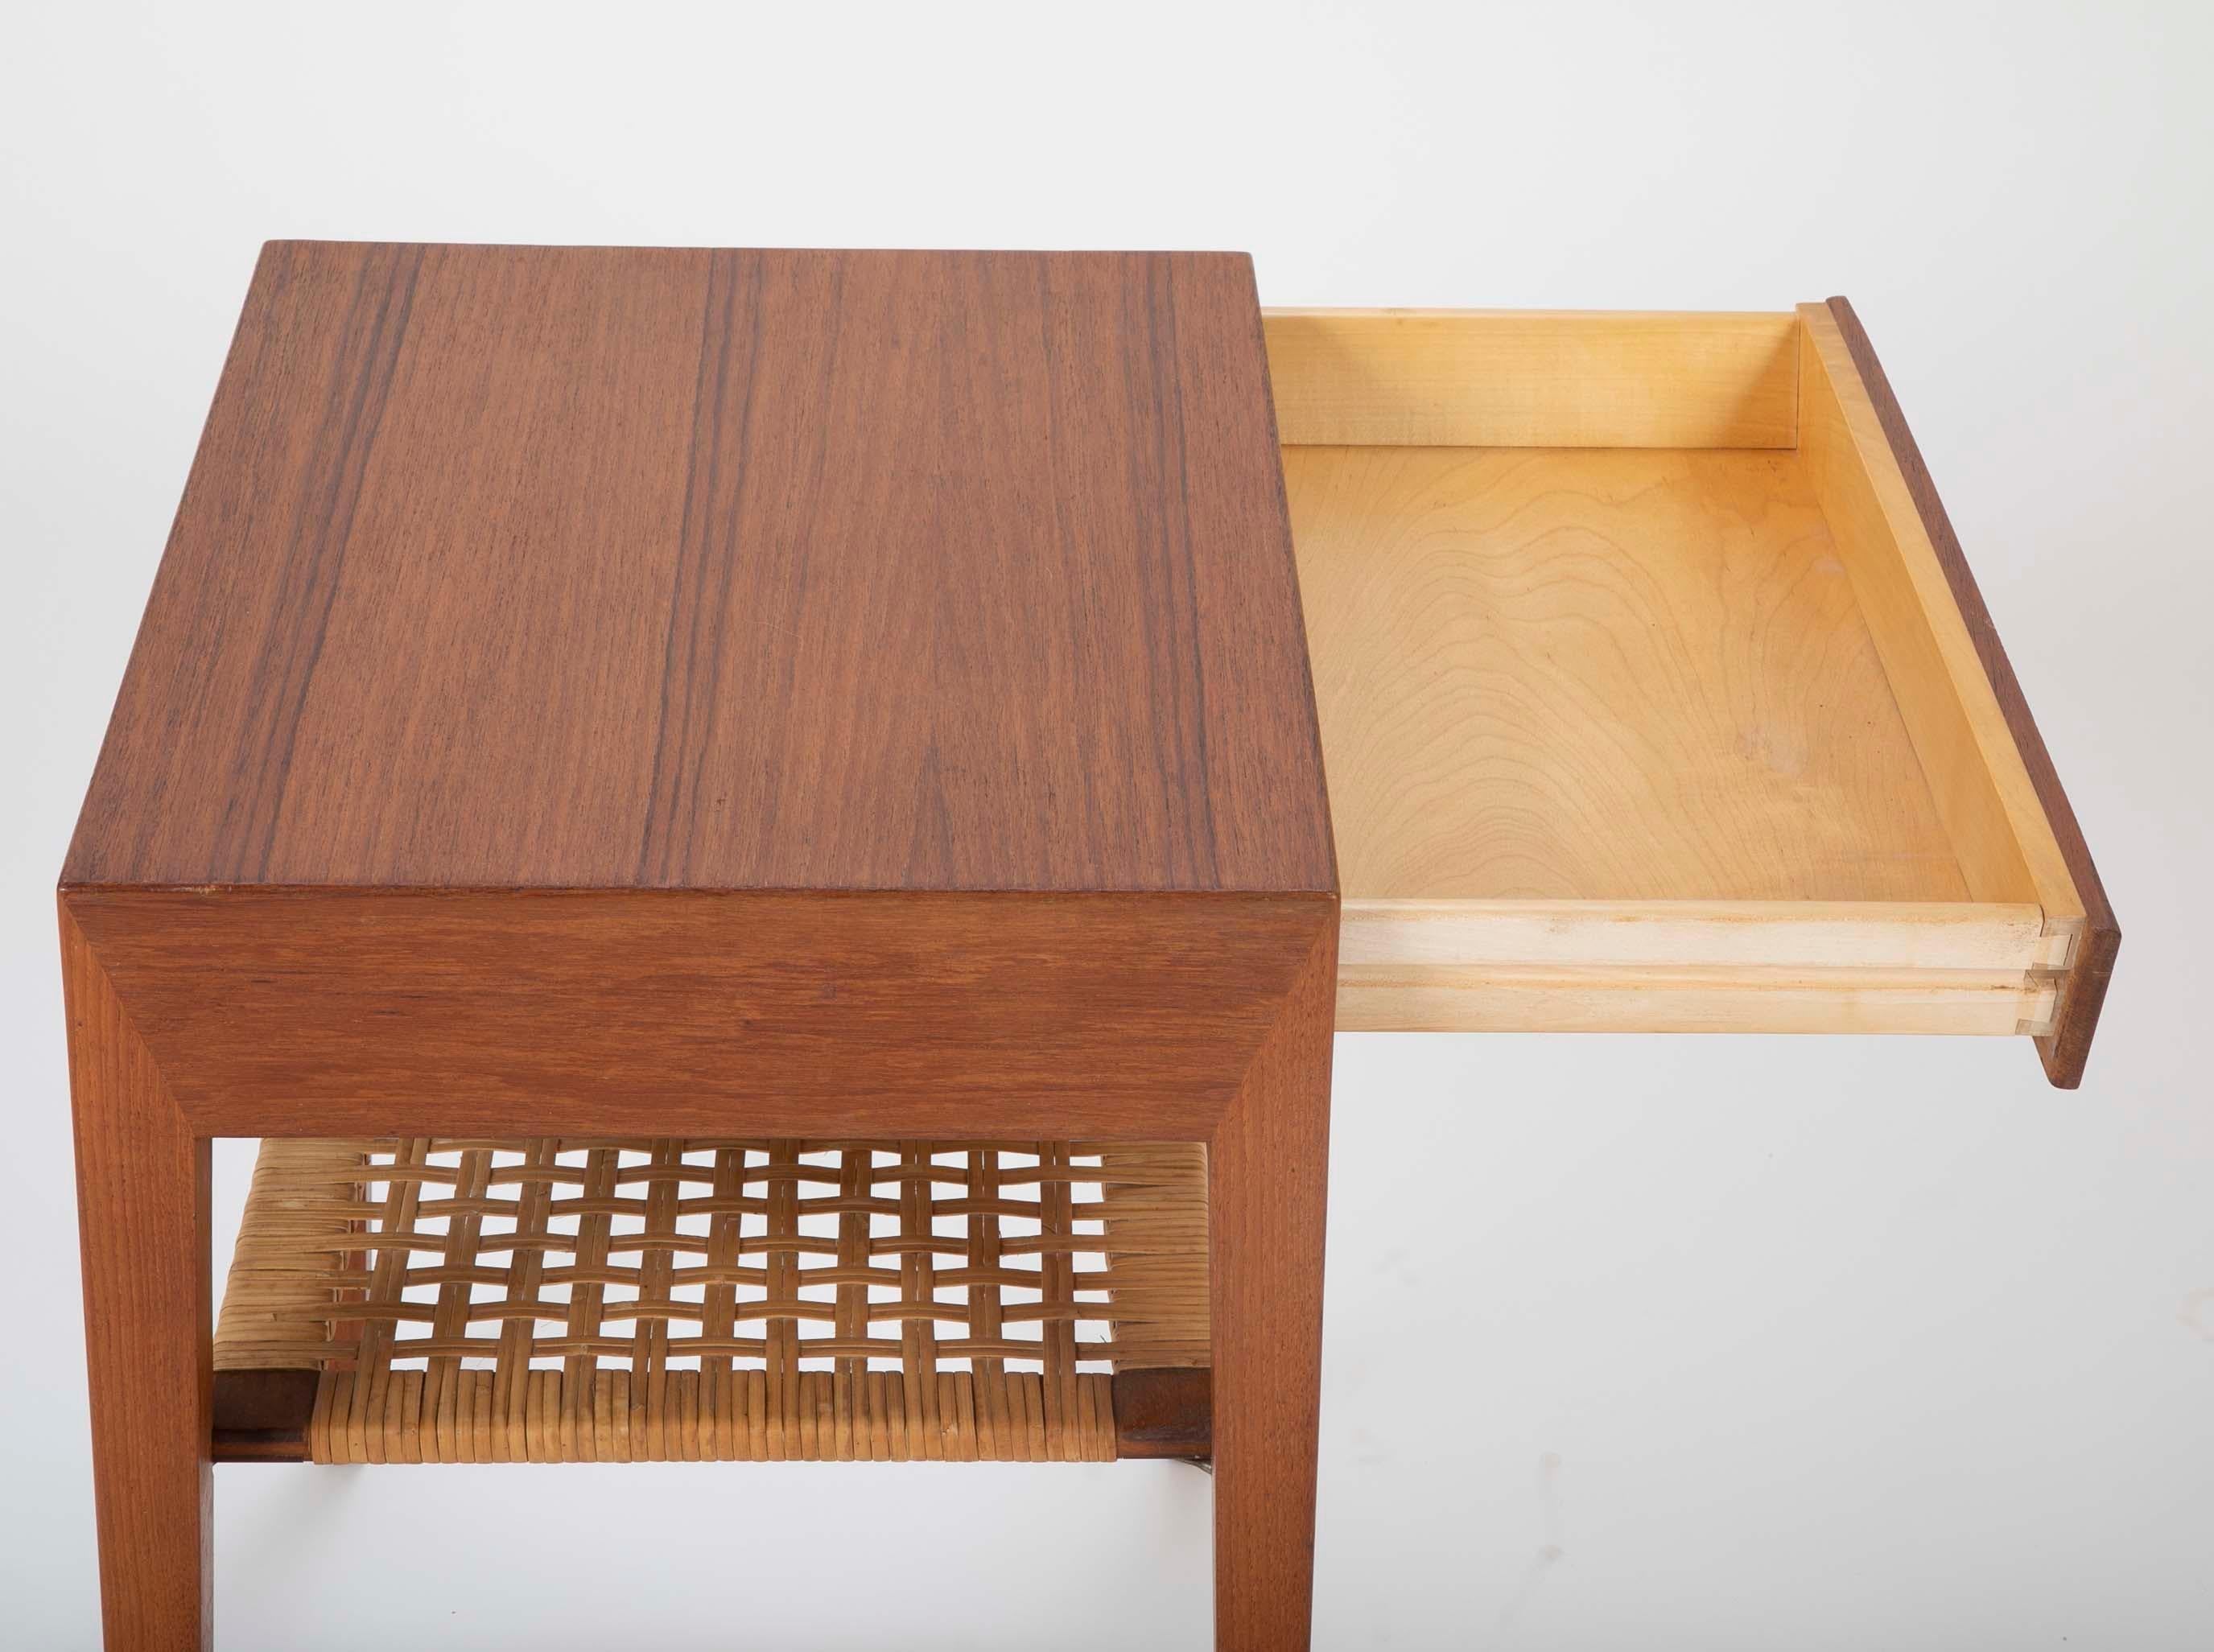 Mid-20th Century Pair of Teak Bedside Tables with Rush Shelf Designed by Severin Hansen Jr.